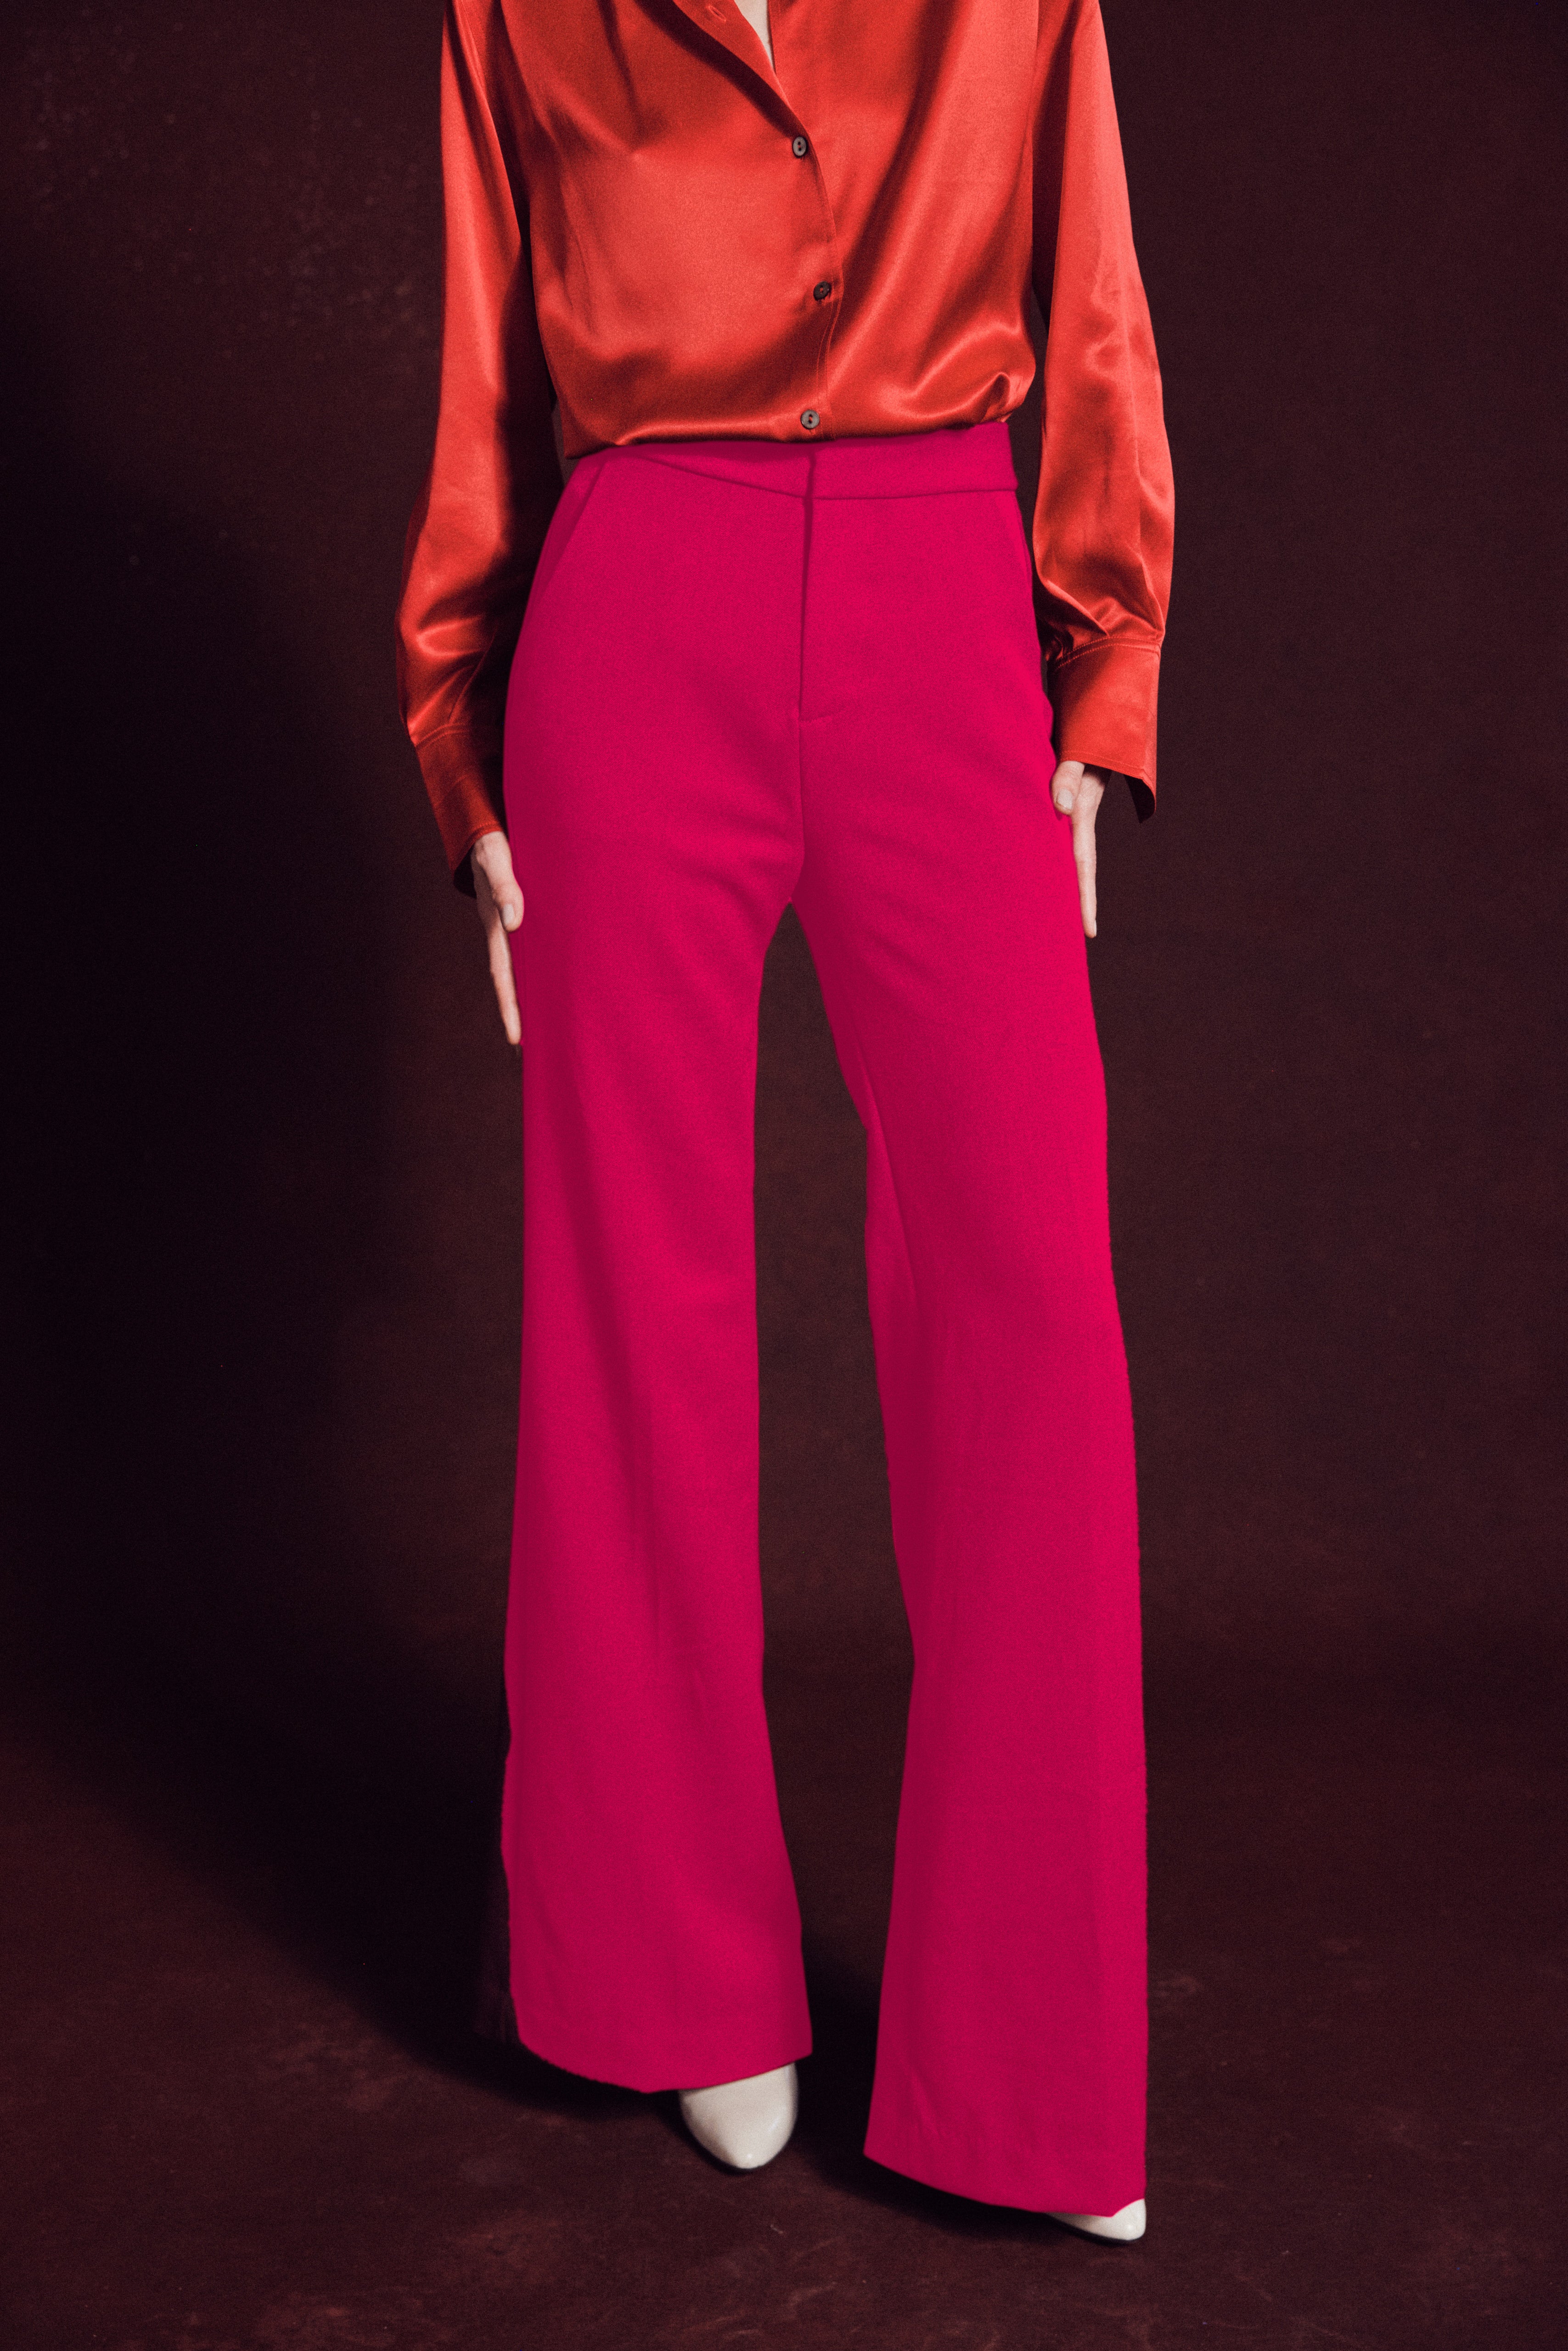 THE MICHELLE PANT in shocking pink